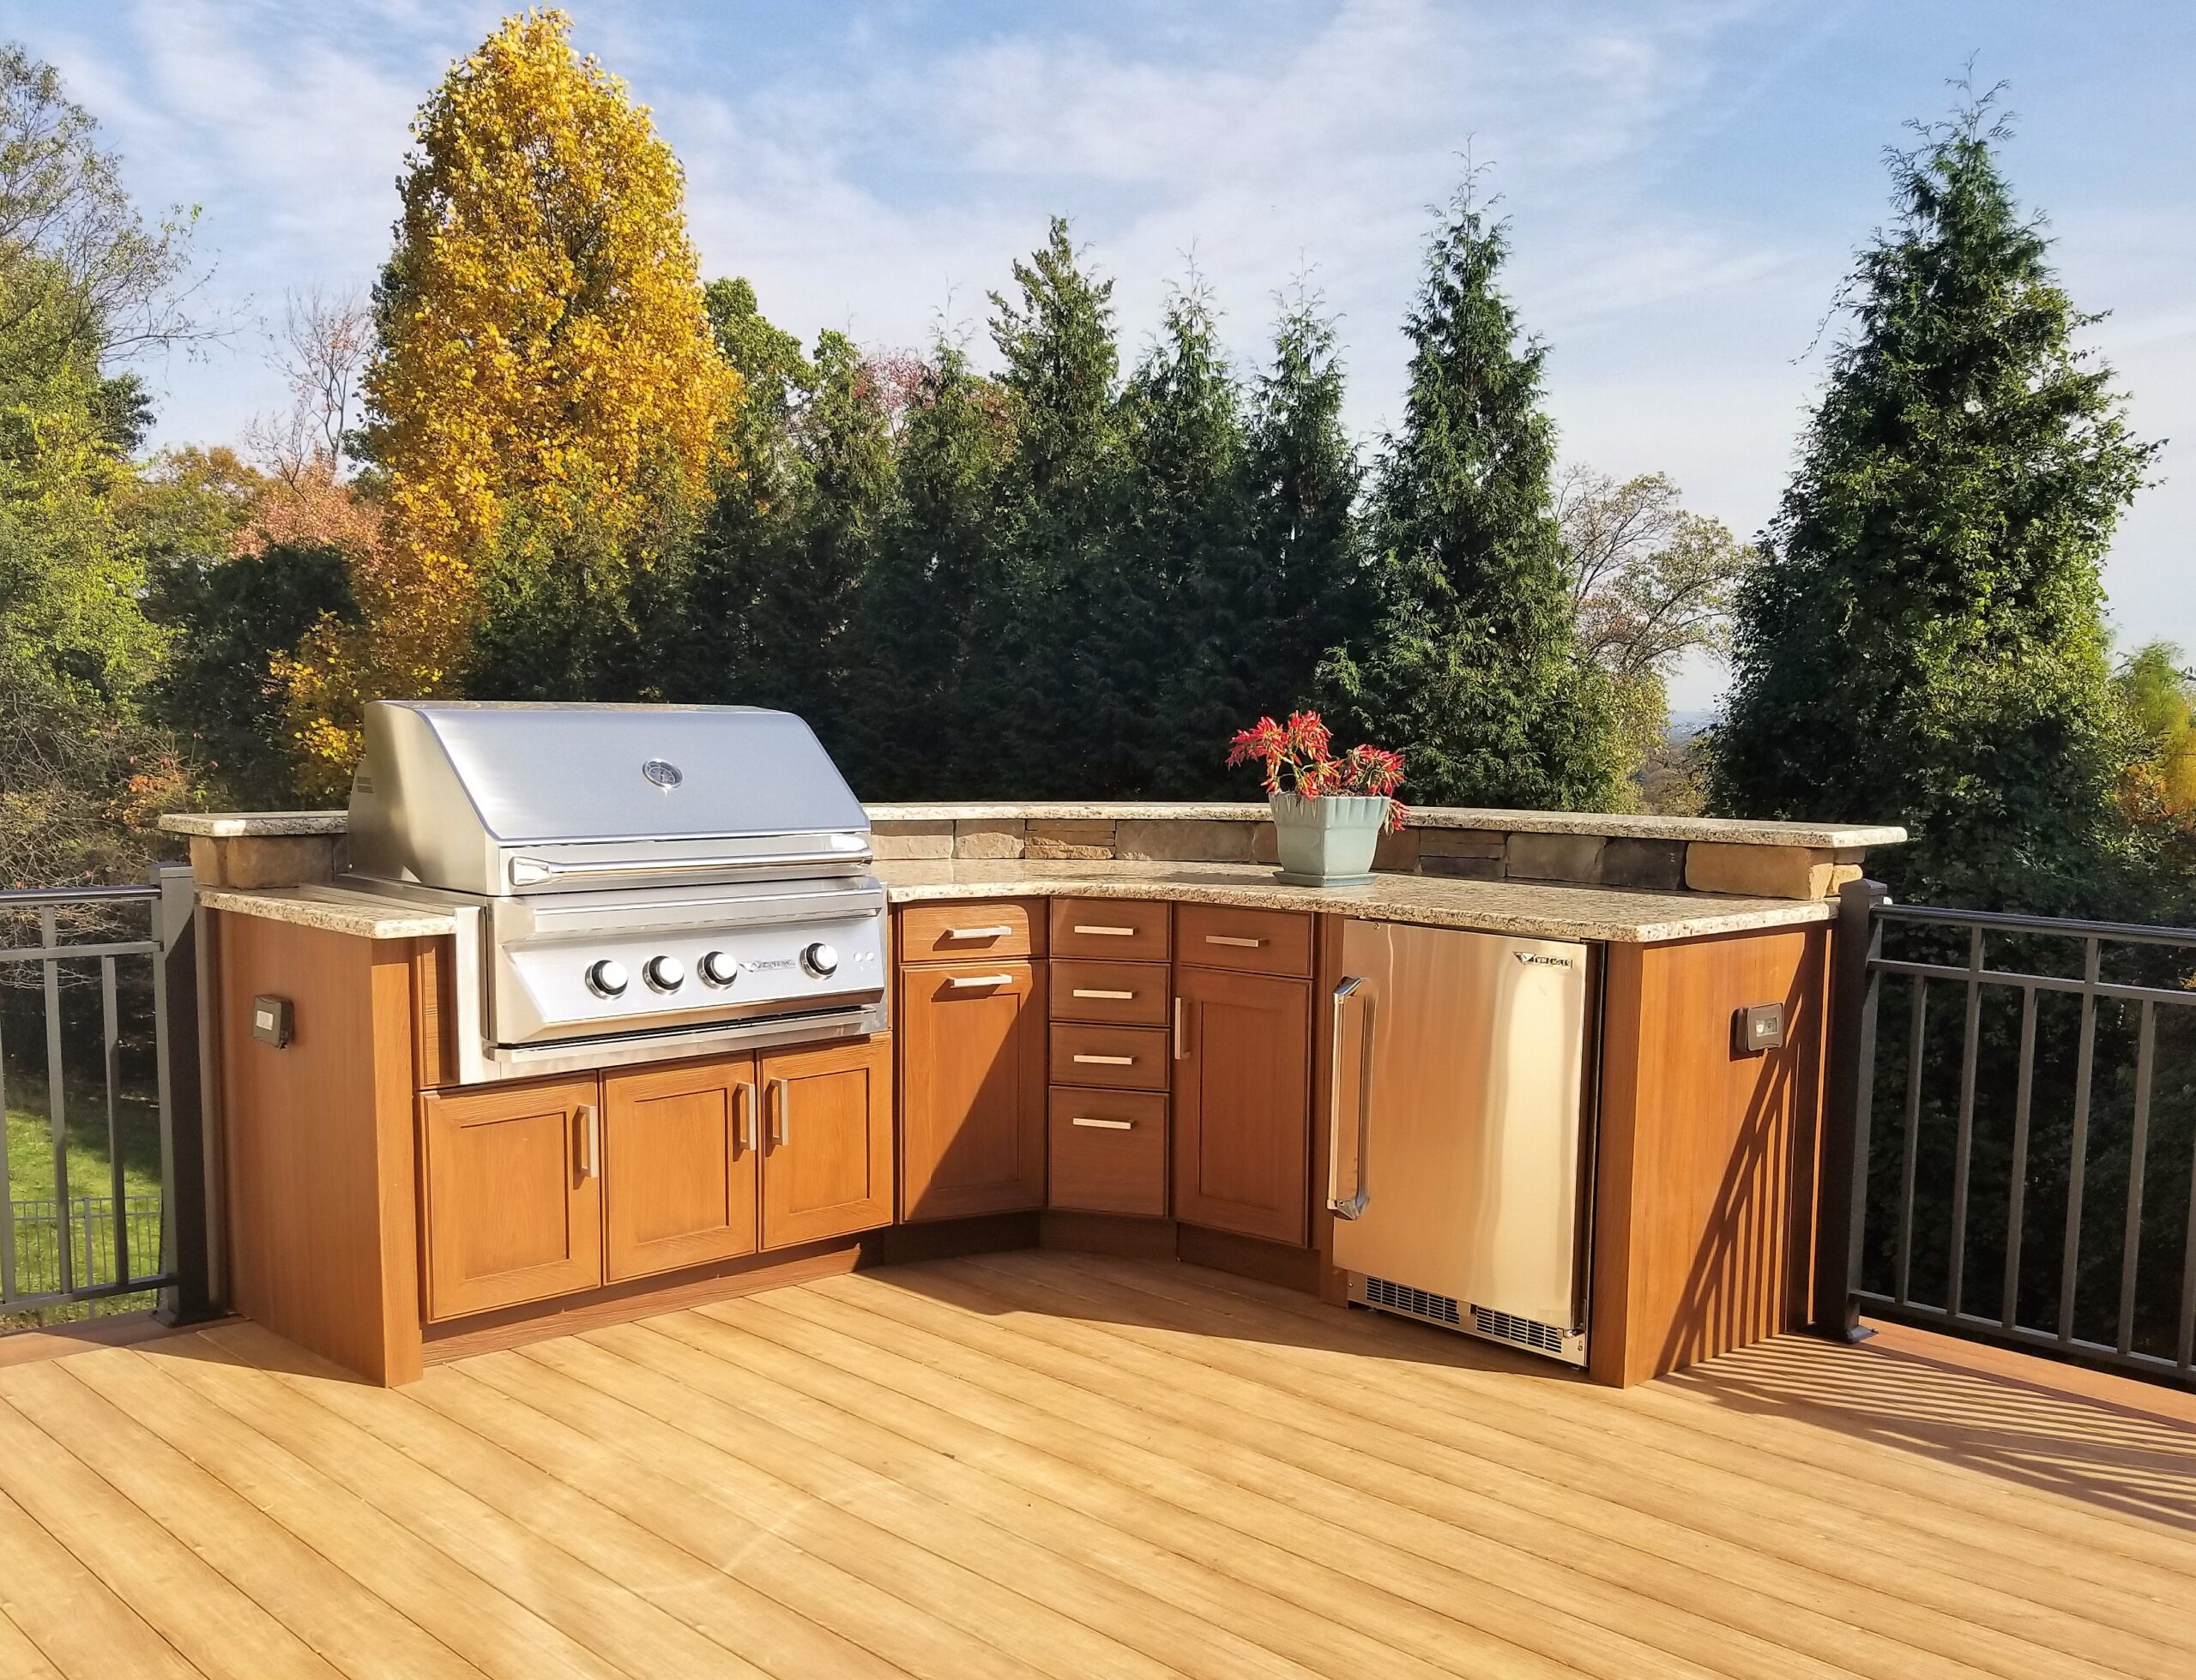 Copy of Deck Remodelers outdoor kitchen 55 scaled